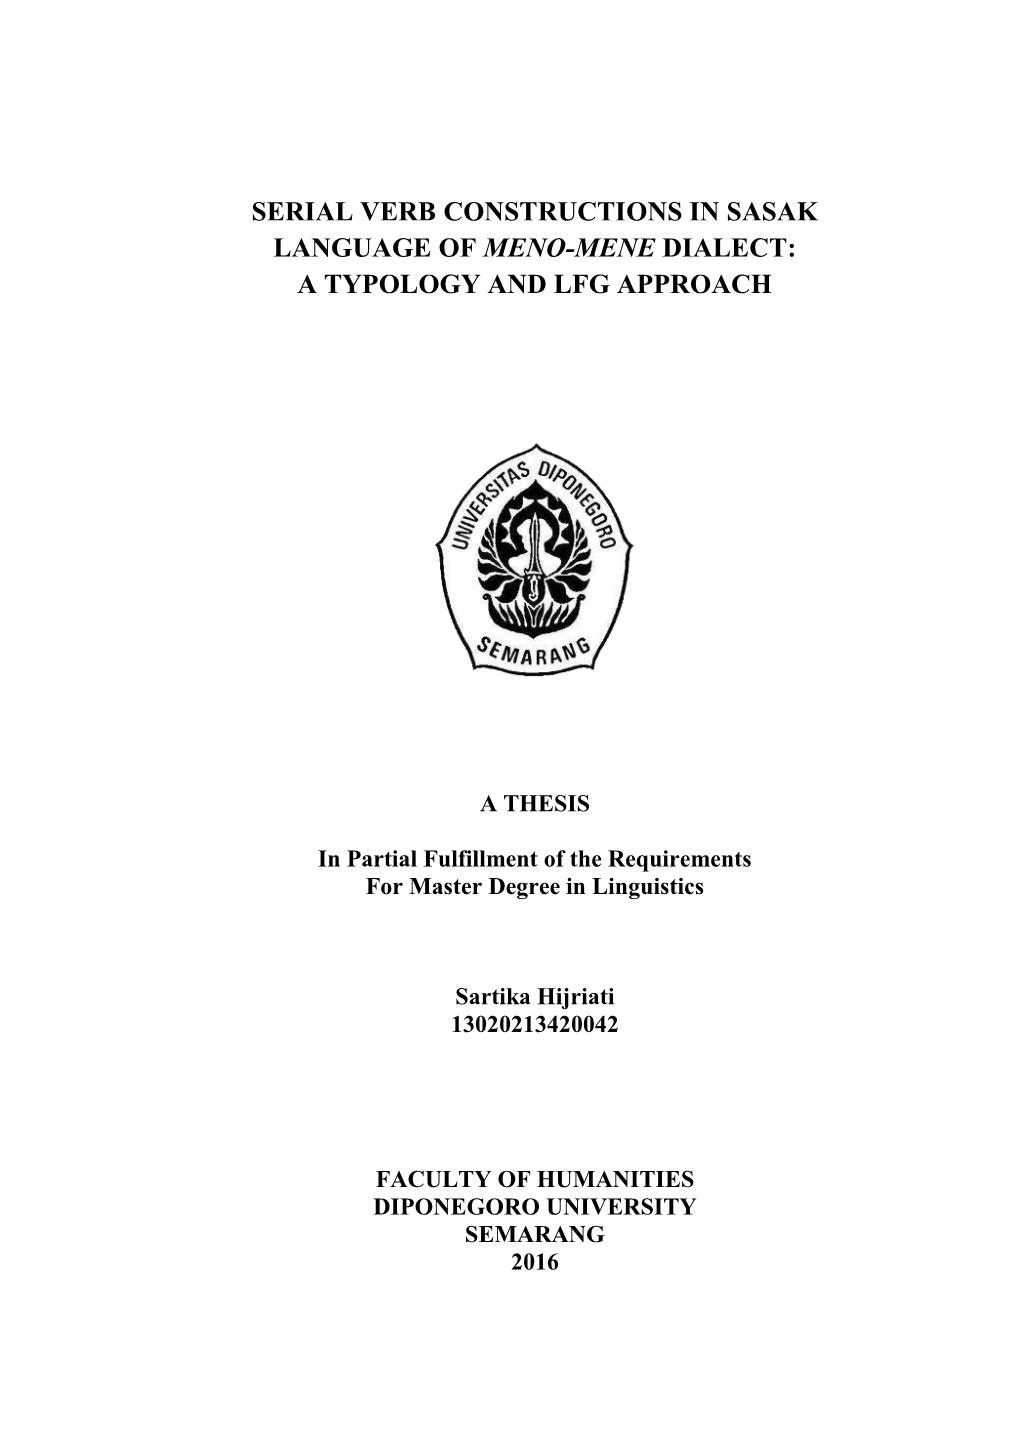 Serial Verb Constructions in Sasak Language of Meno-Mene Dialect: a Typology and Lfg Approach